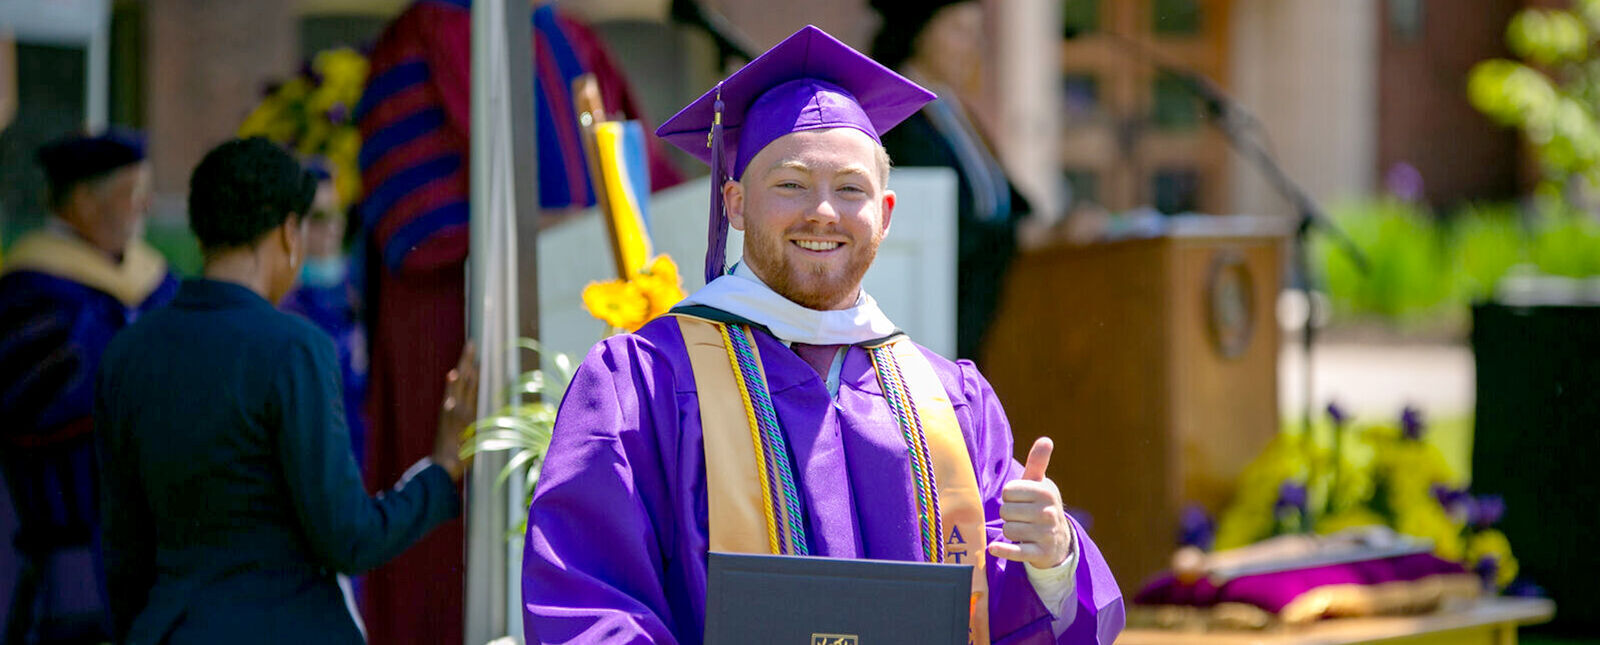 A male graduate gives a thumbs up to the camera after receiving his degree